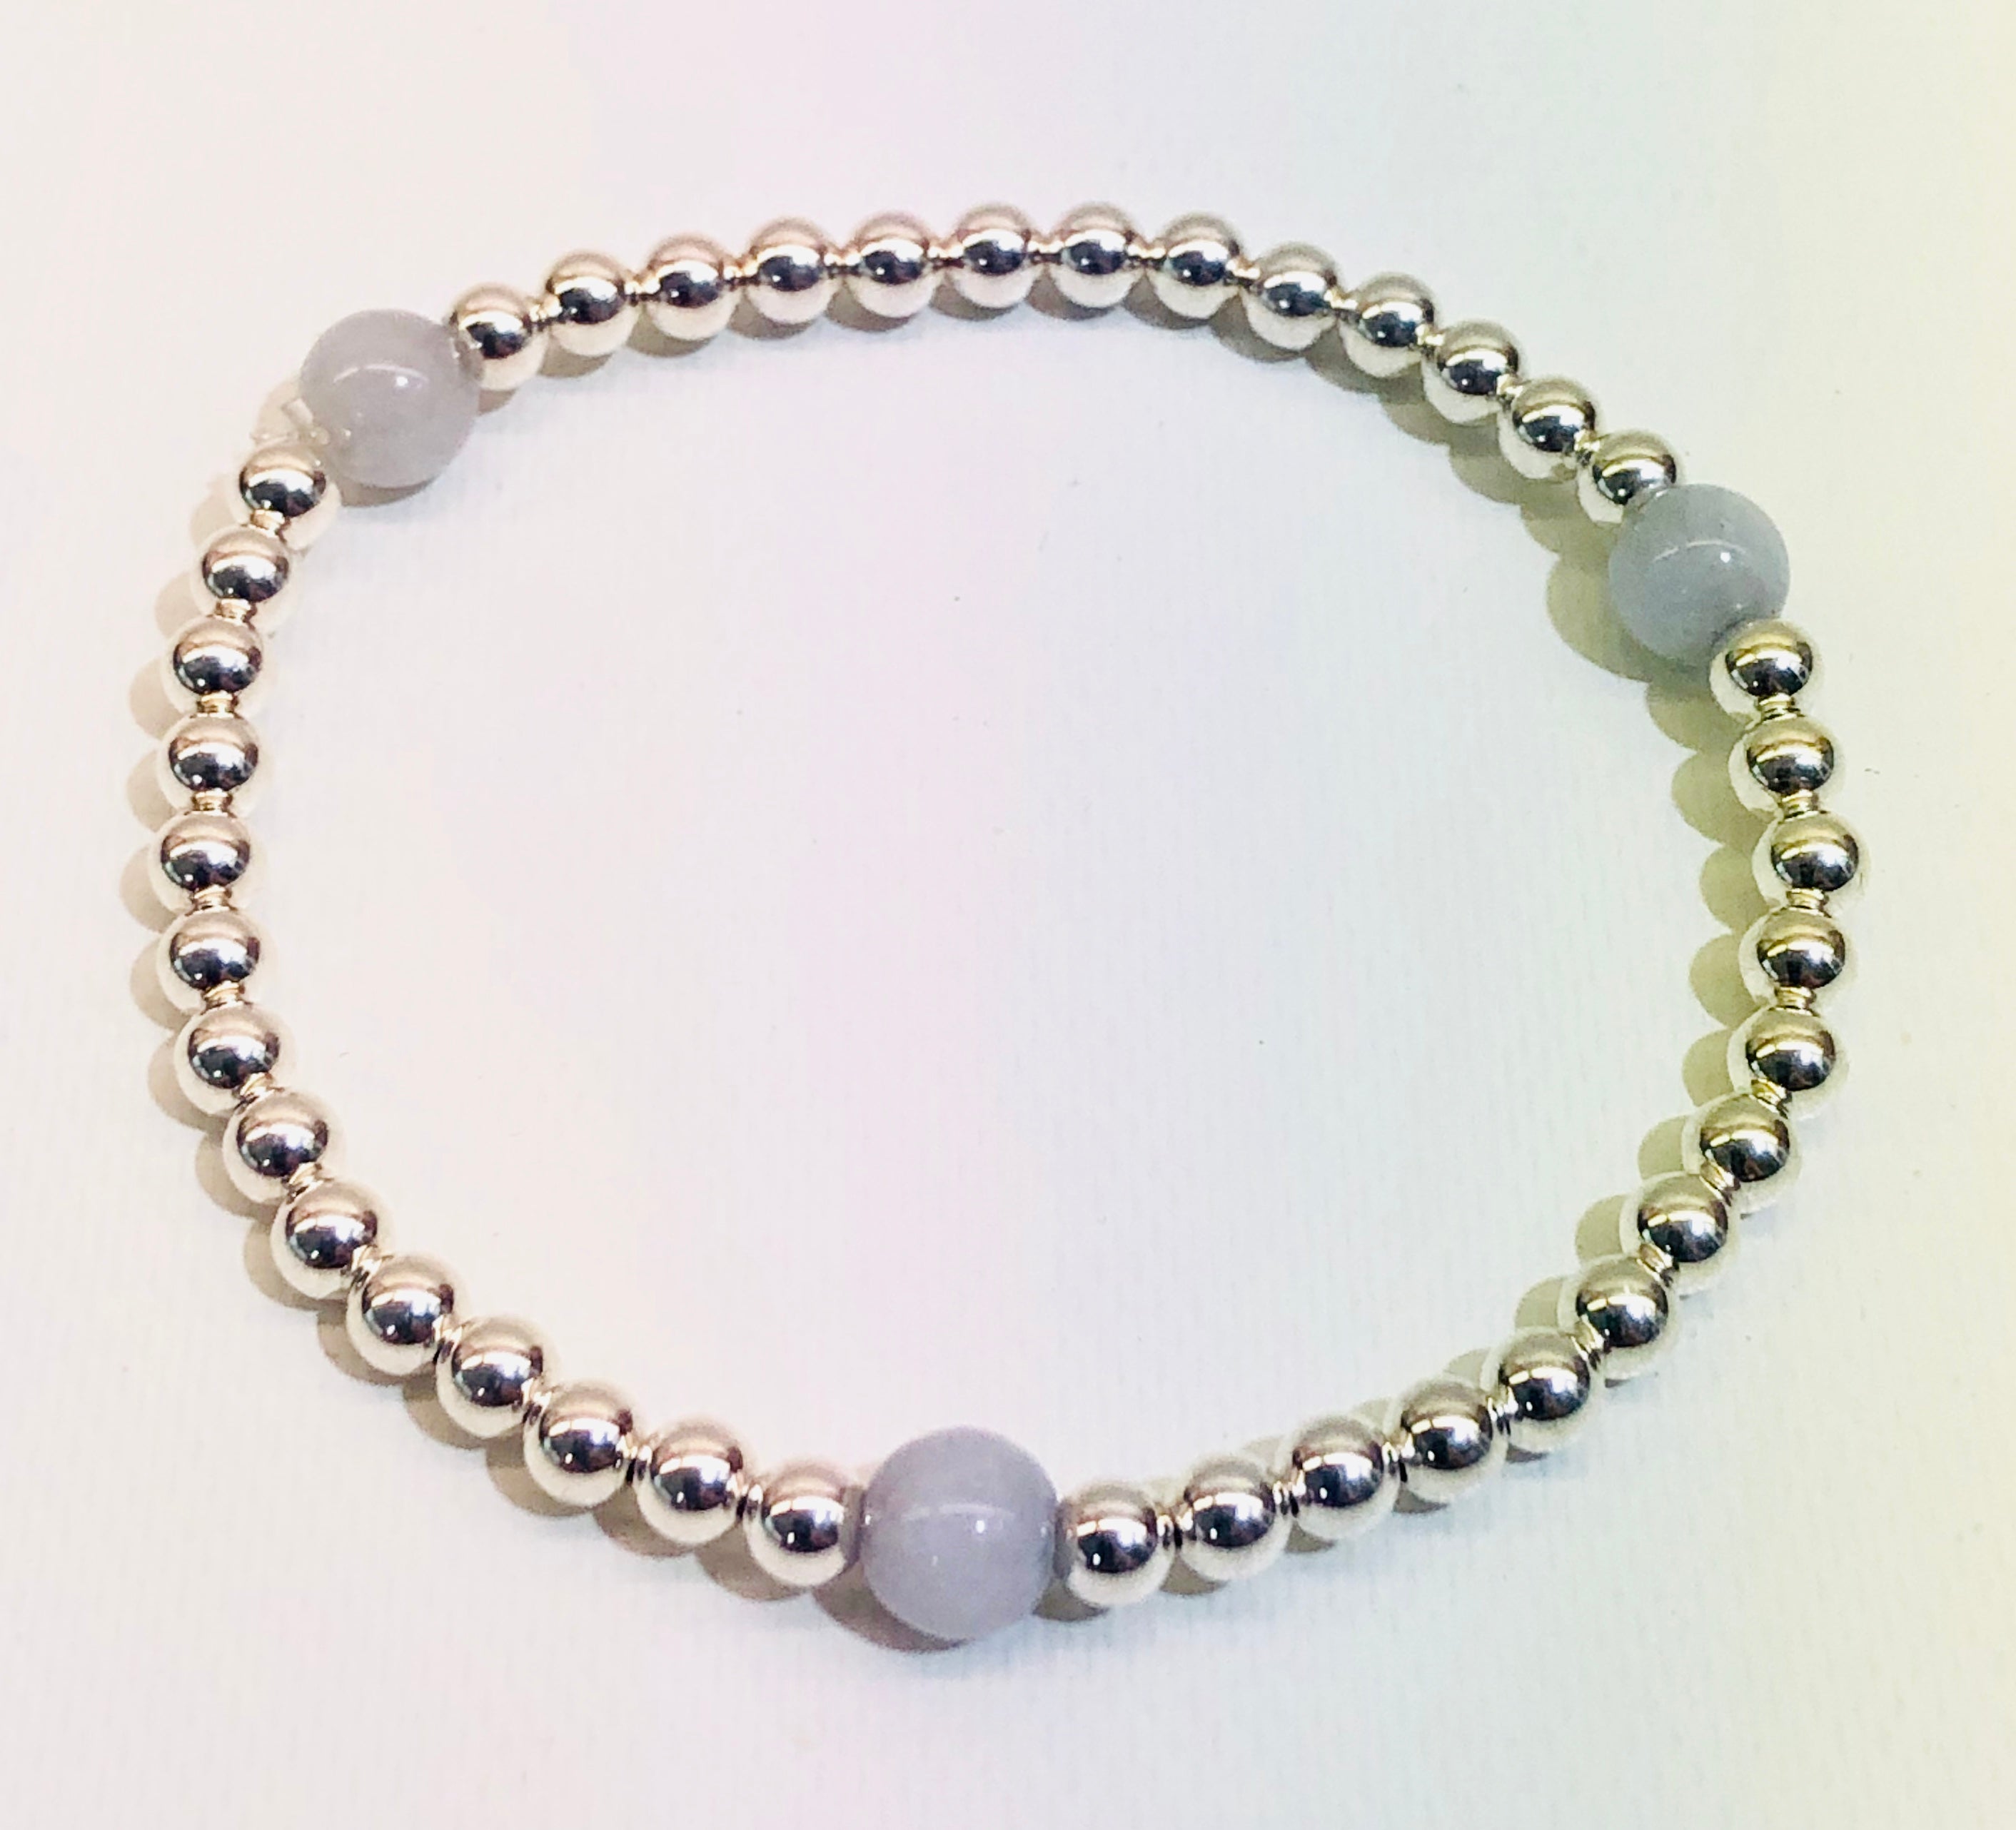 4mm Sterling Silver Bead Bracelet with 3 6mm Quartz Beads